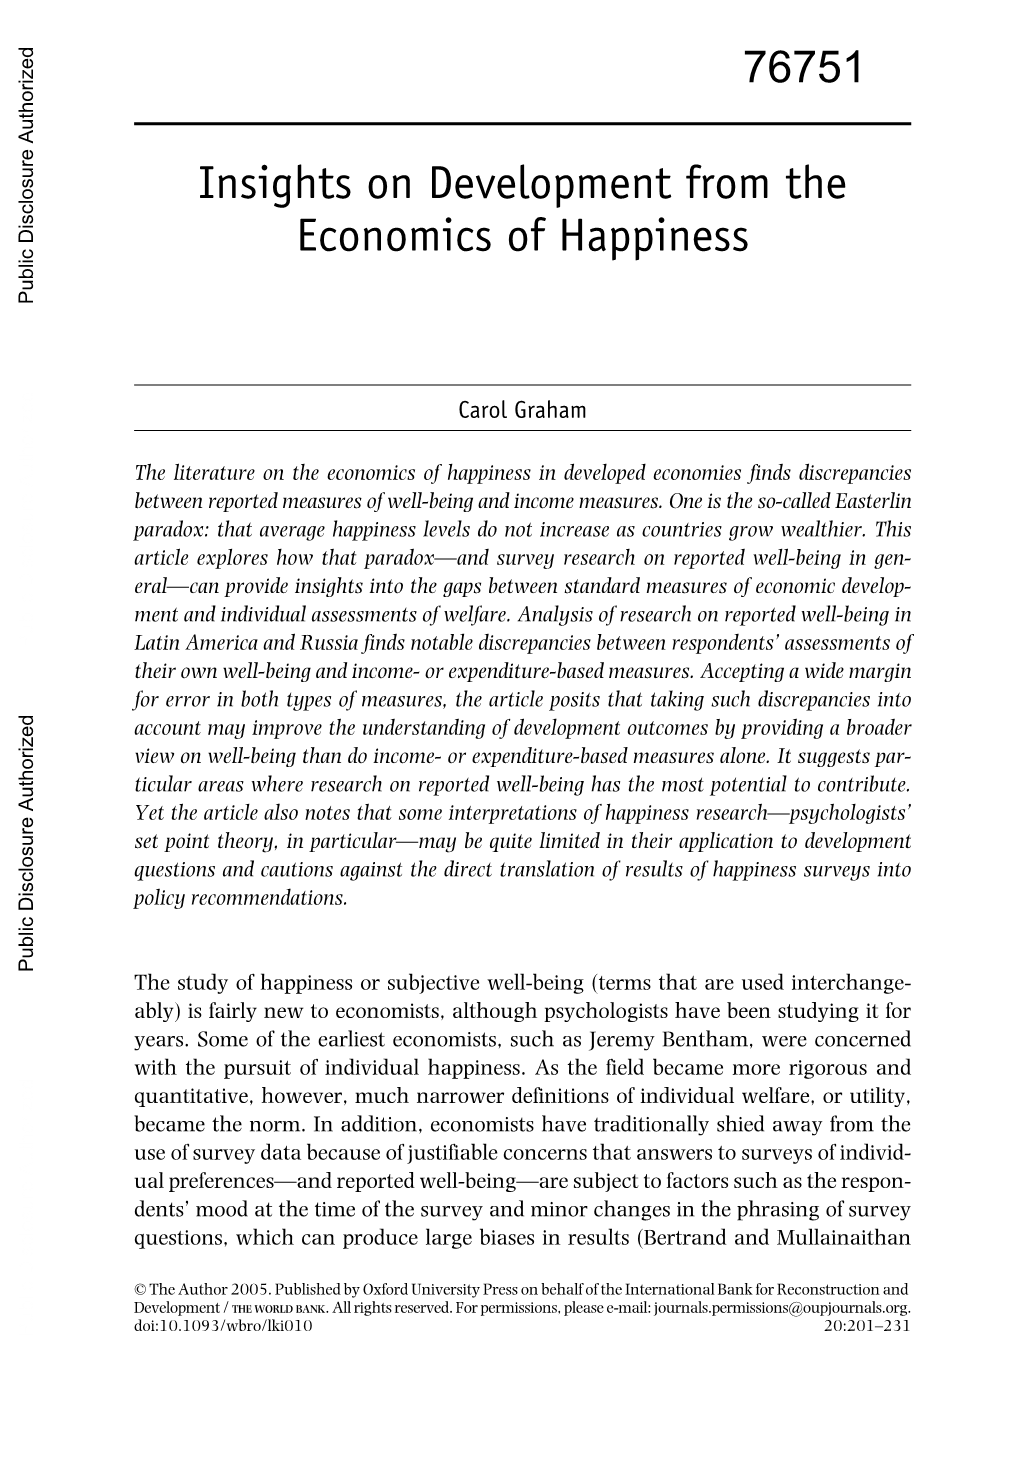 Insights on Development from the Economics of Happiness Public Disclosure Authorized